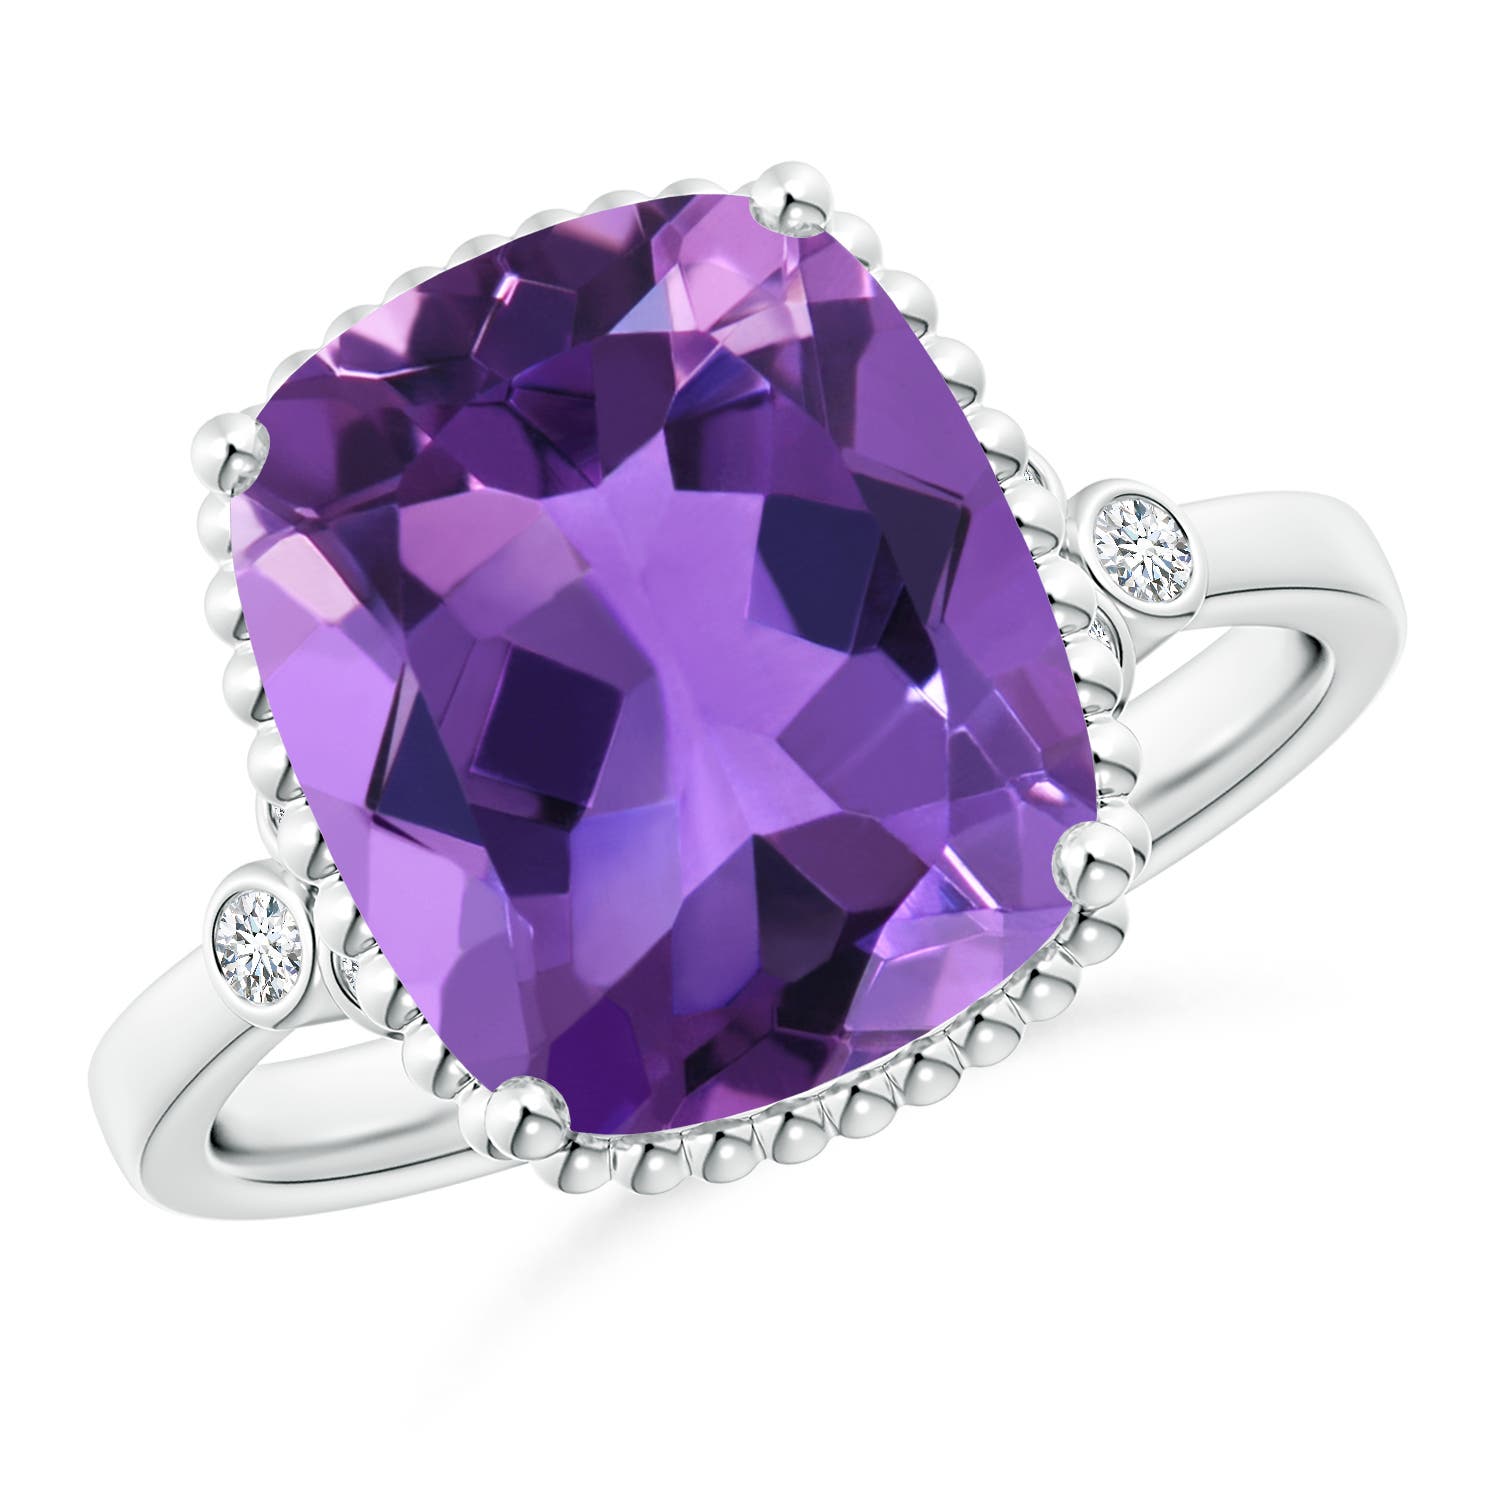 AAA - Amethyst / 4.71 CT / 14 KT White Gold